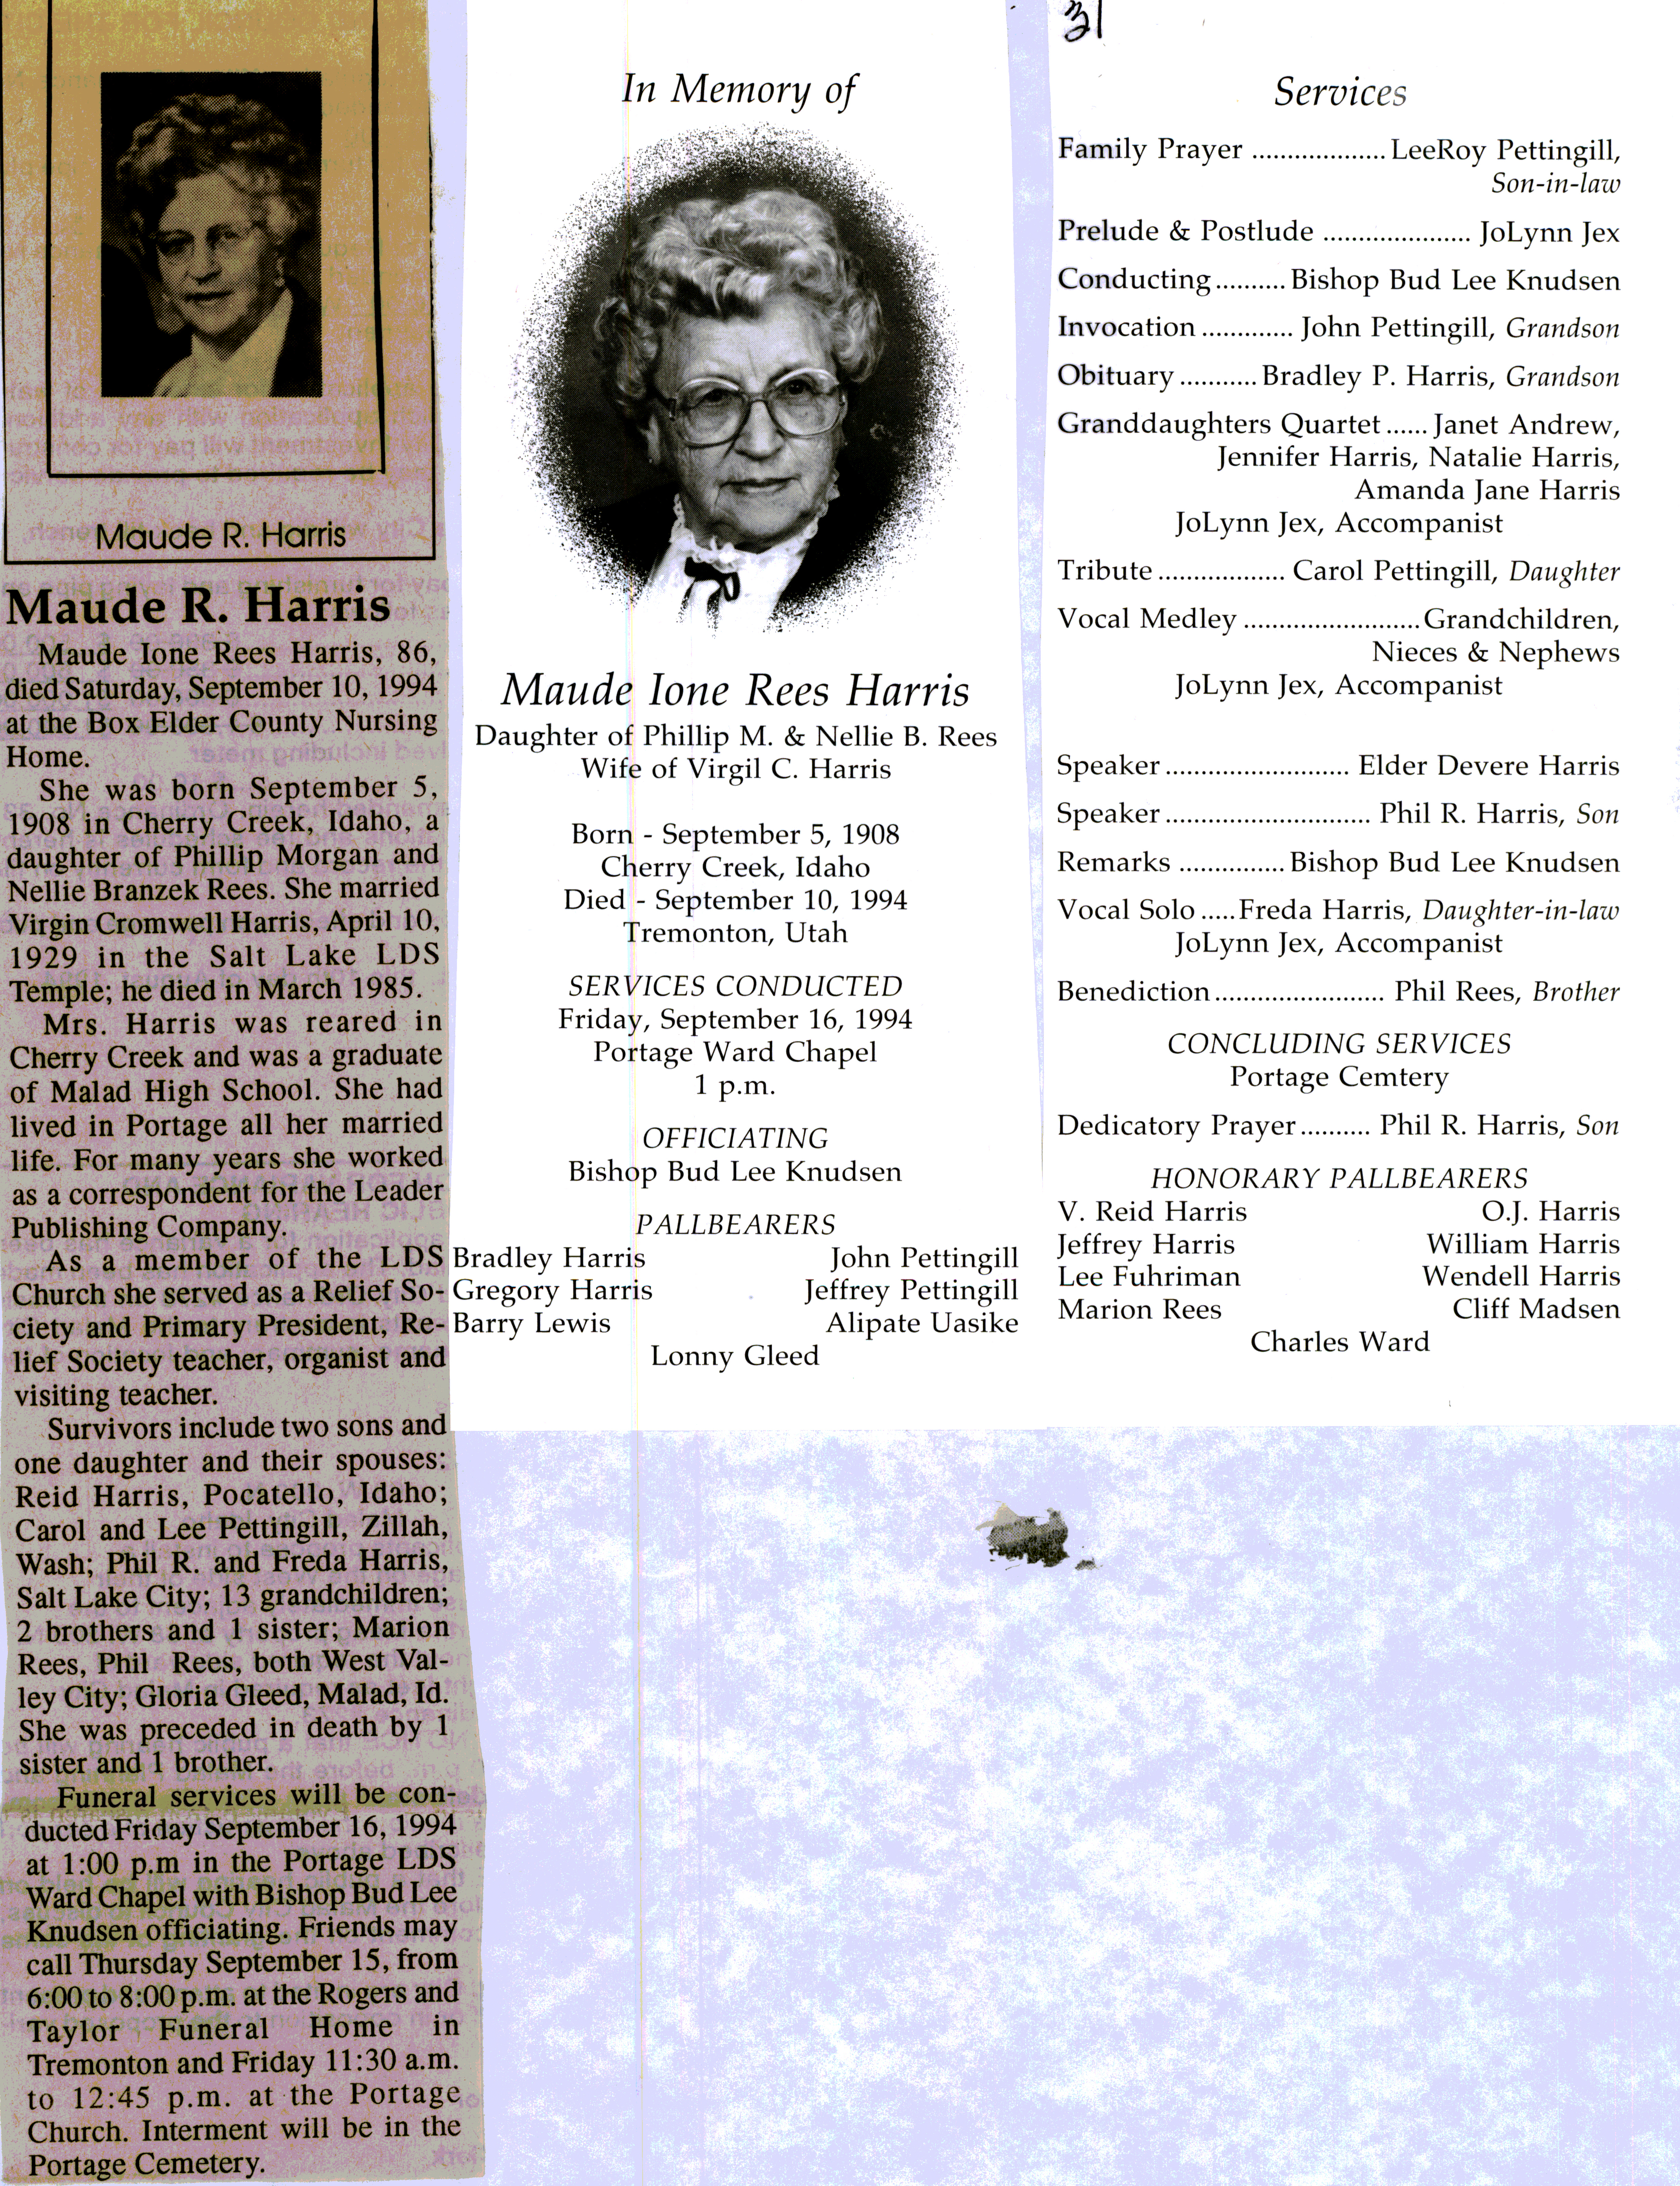 Maude Ione Rees Harris obit and program